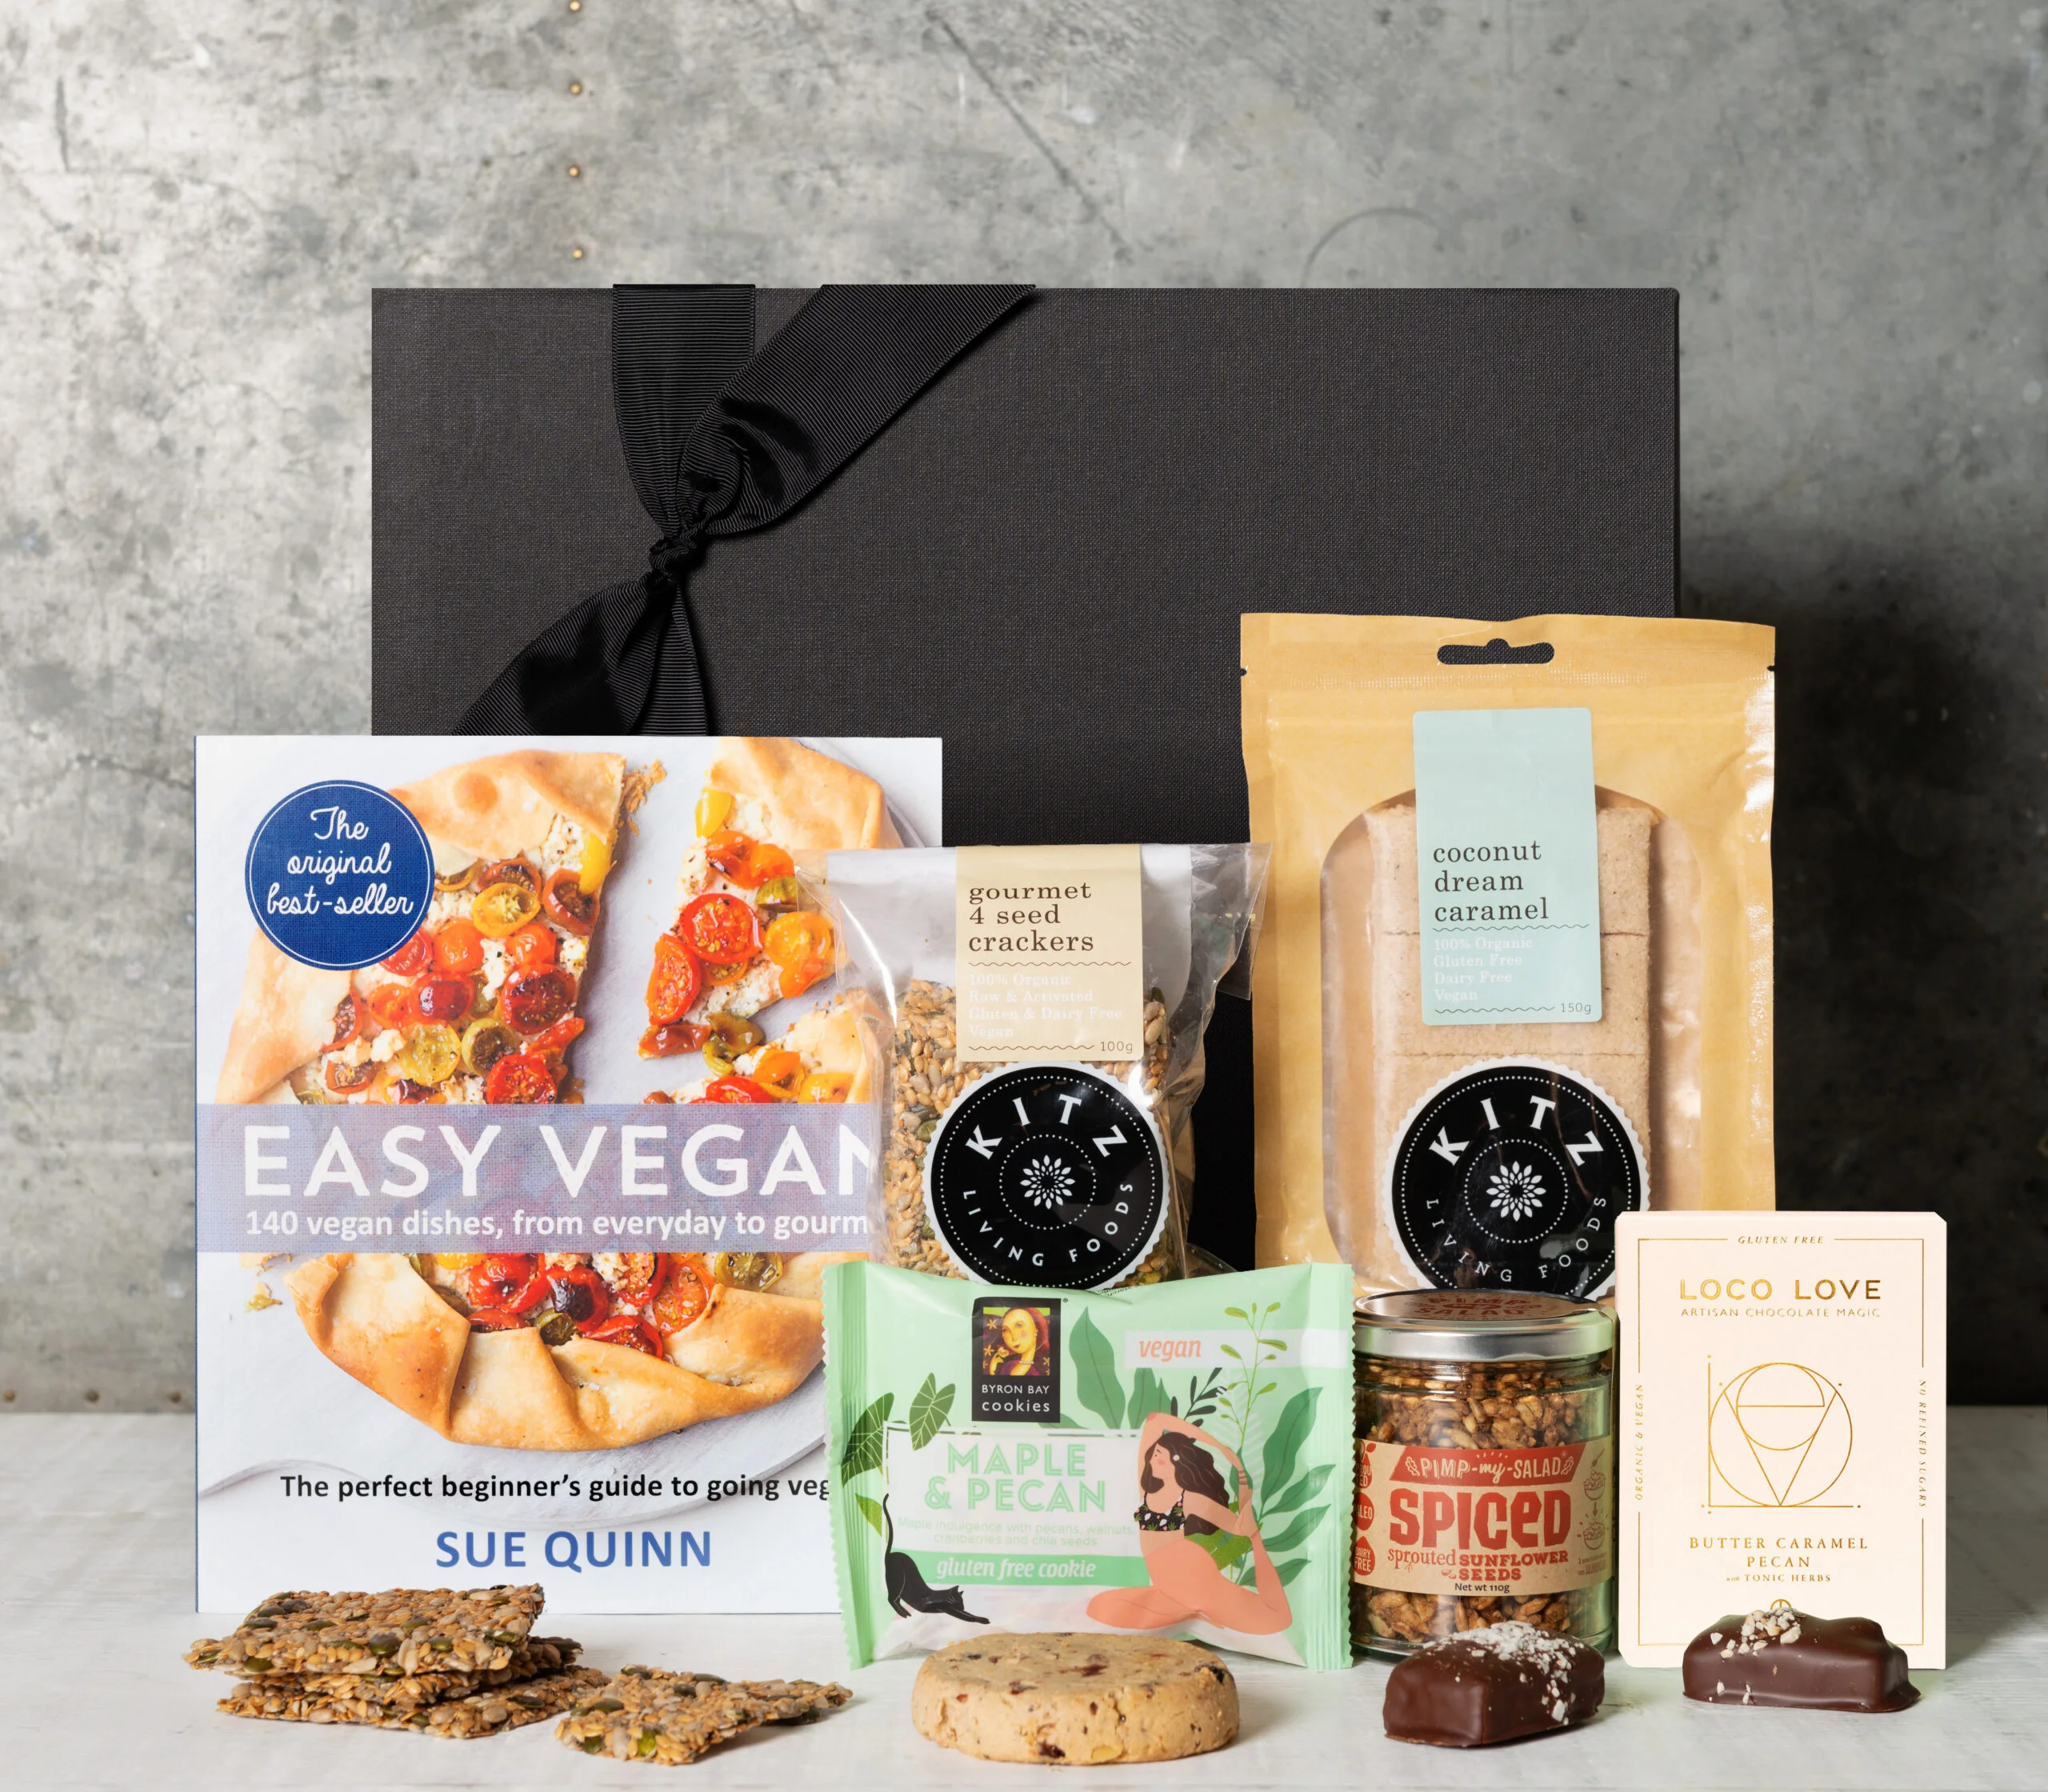 15 Amazing Mothers Day Hampers That Mum Will Adore I Stay at Home Mum